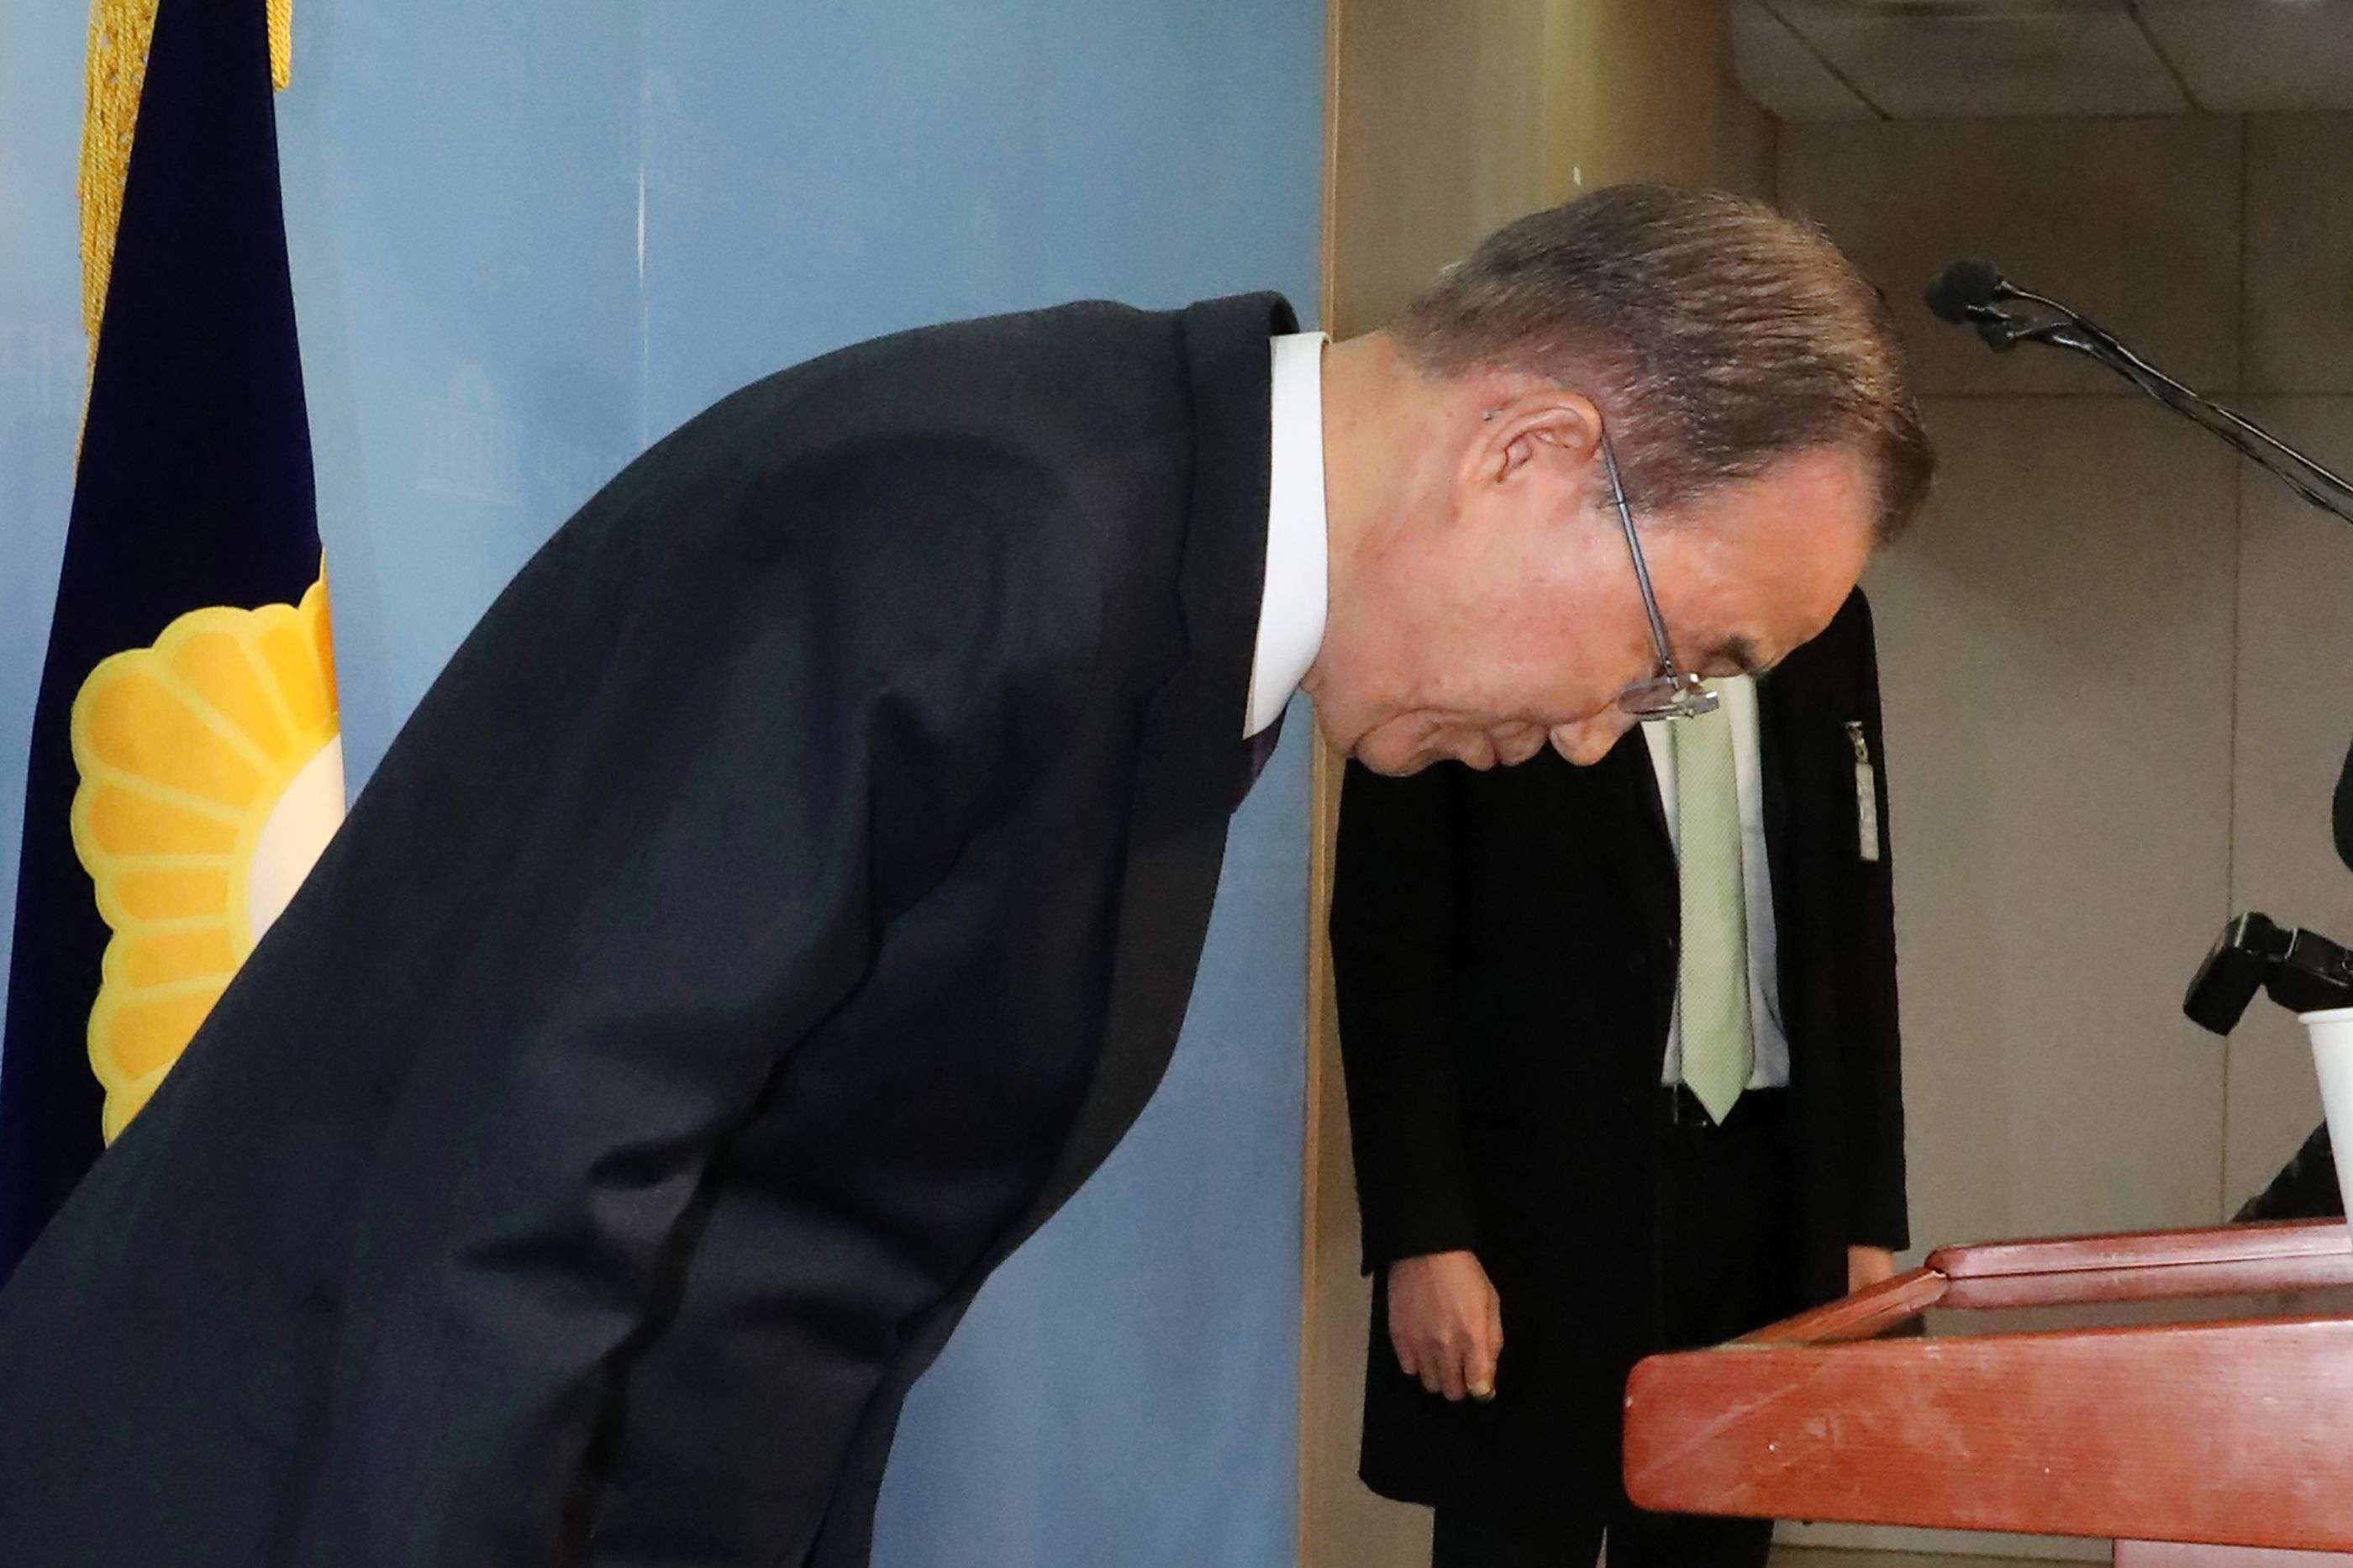 Former United Nations secretary-general Ban Ki-moon bows as he announces an end to his attempt to seek South Korea's presidency. Photo: AFP